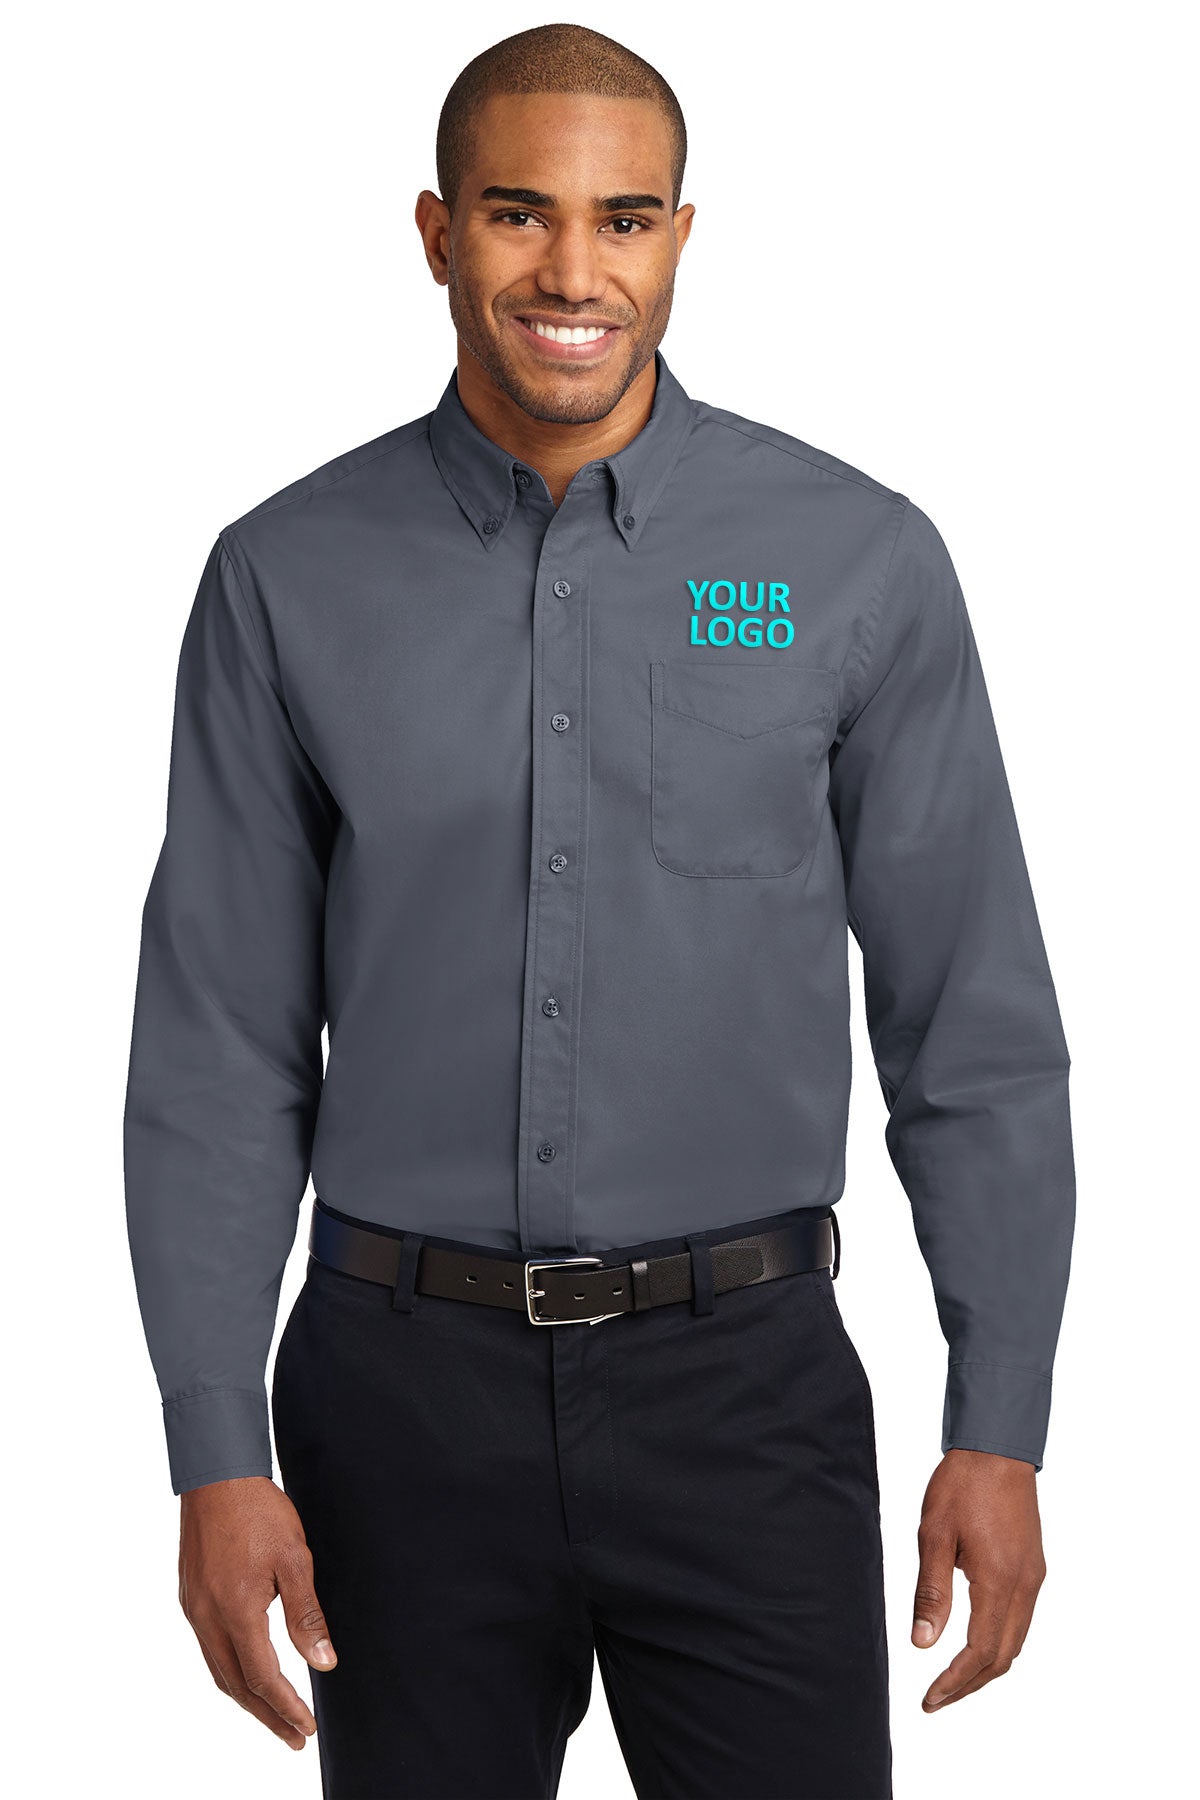 Port Authority Steel Grey/ Light Stone TLS608 embroidered work shirts